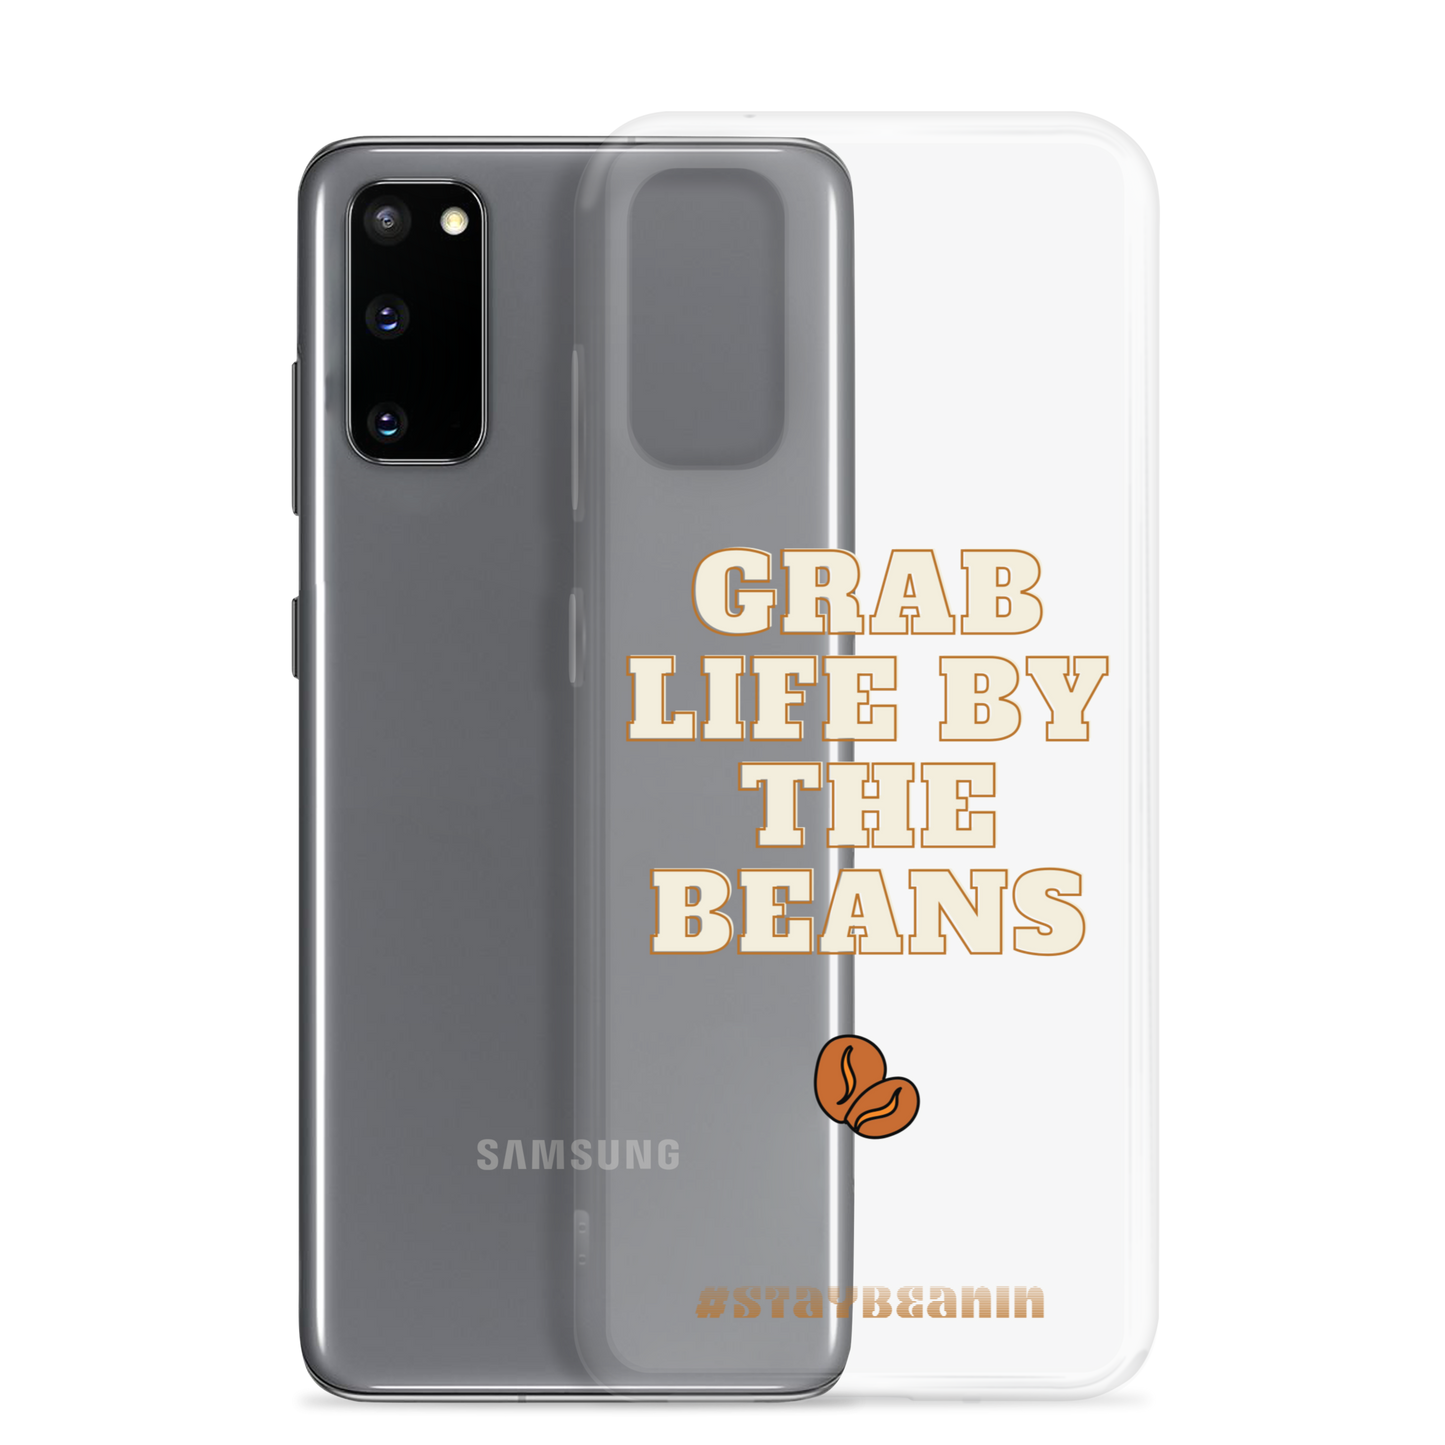 Grab Life By The Beans Samsung Case